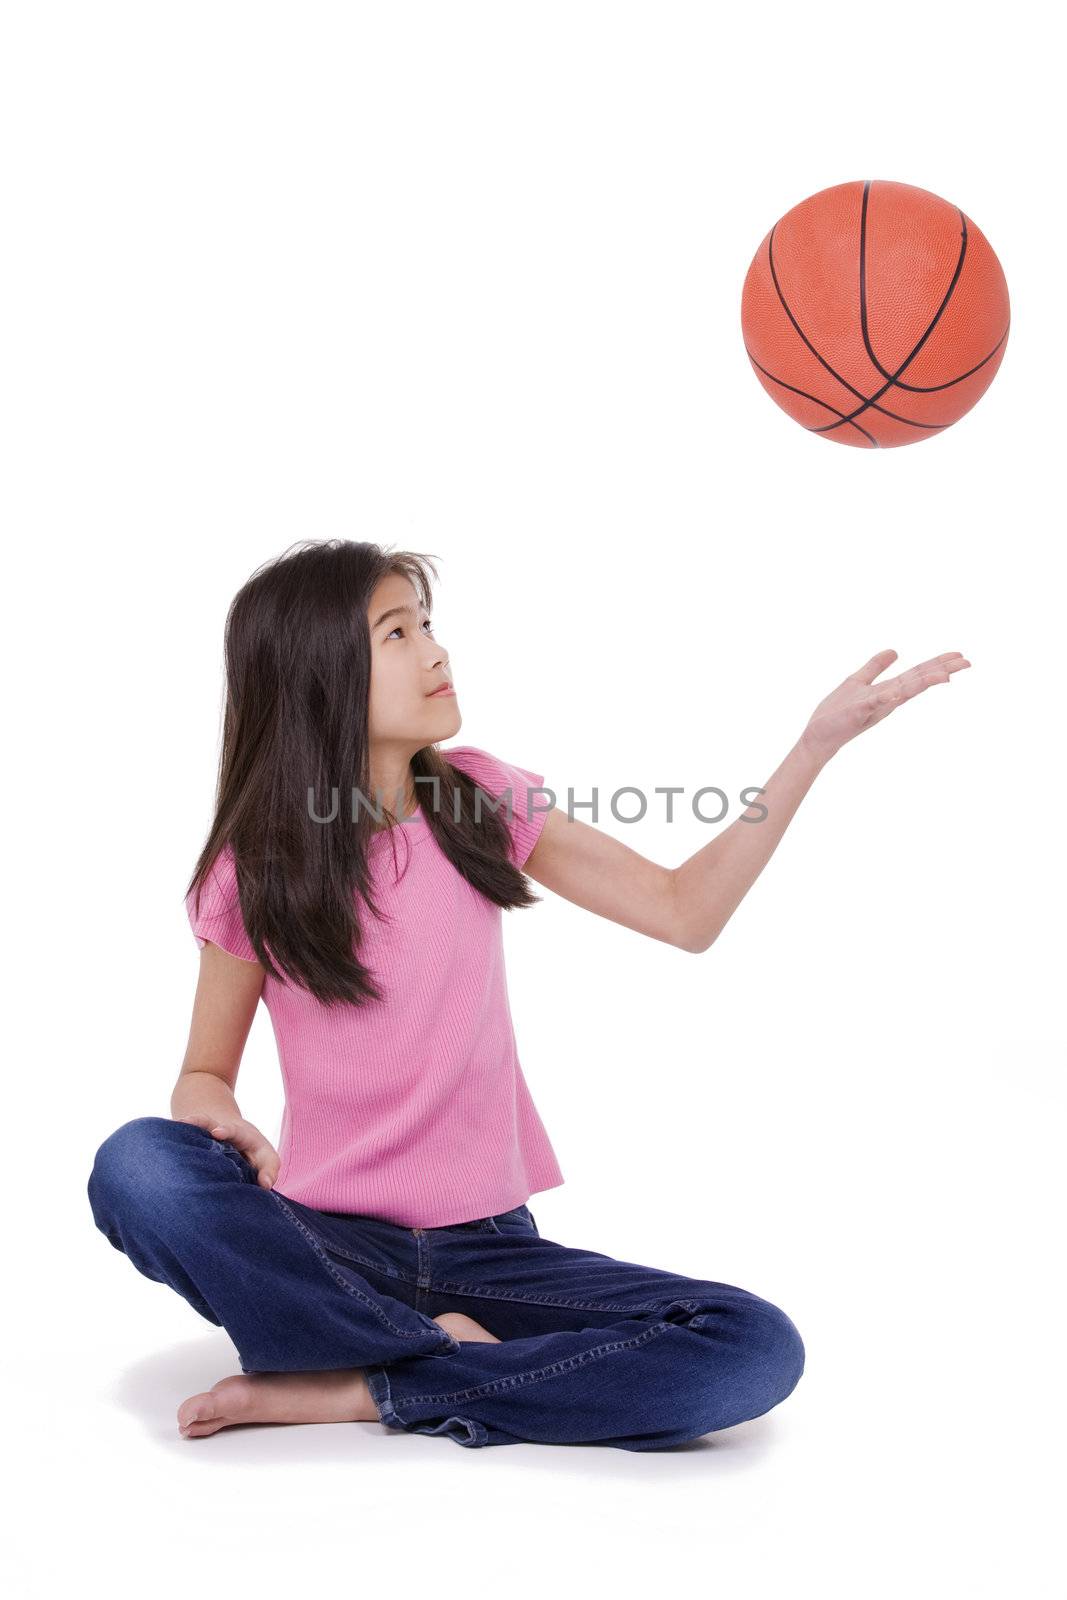 Young girl throwing basketball, isolated on white by jarenwicklund